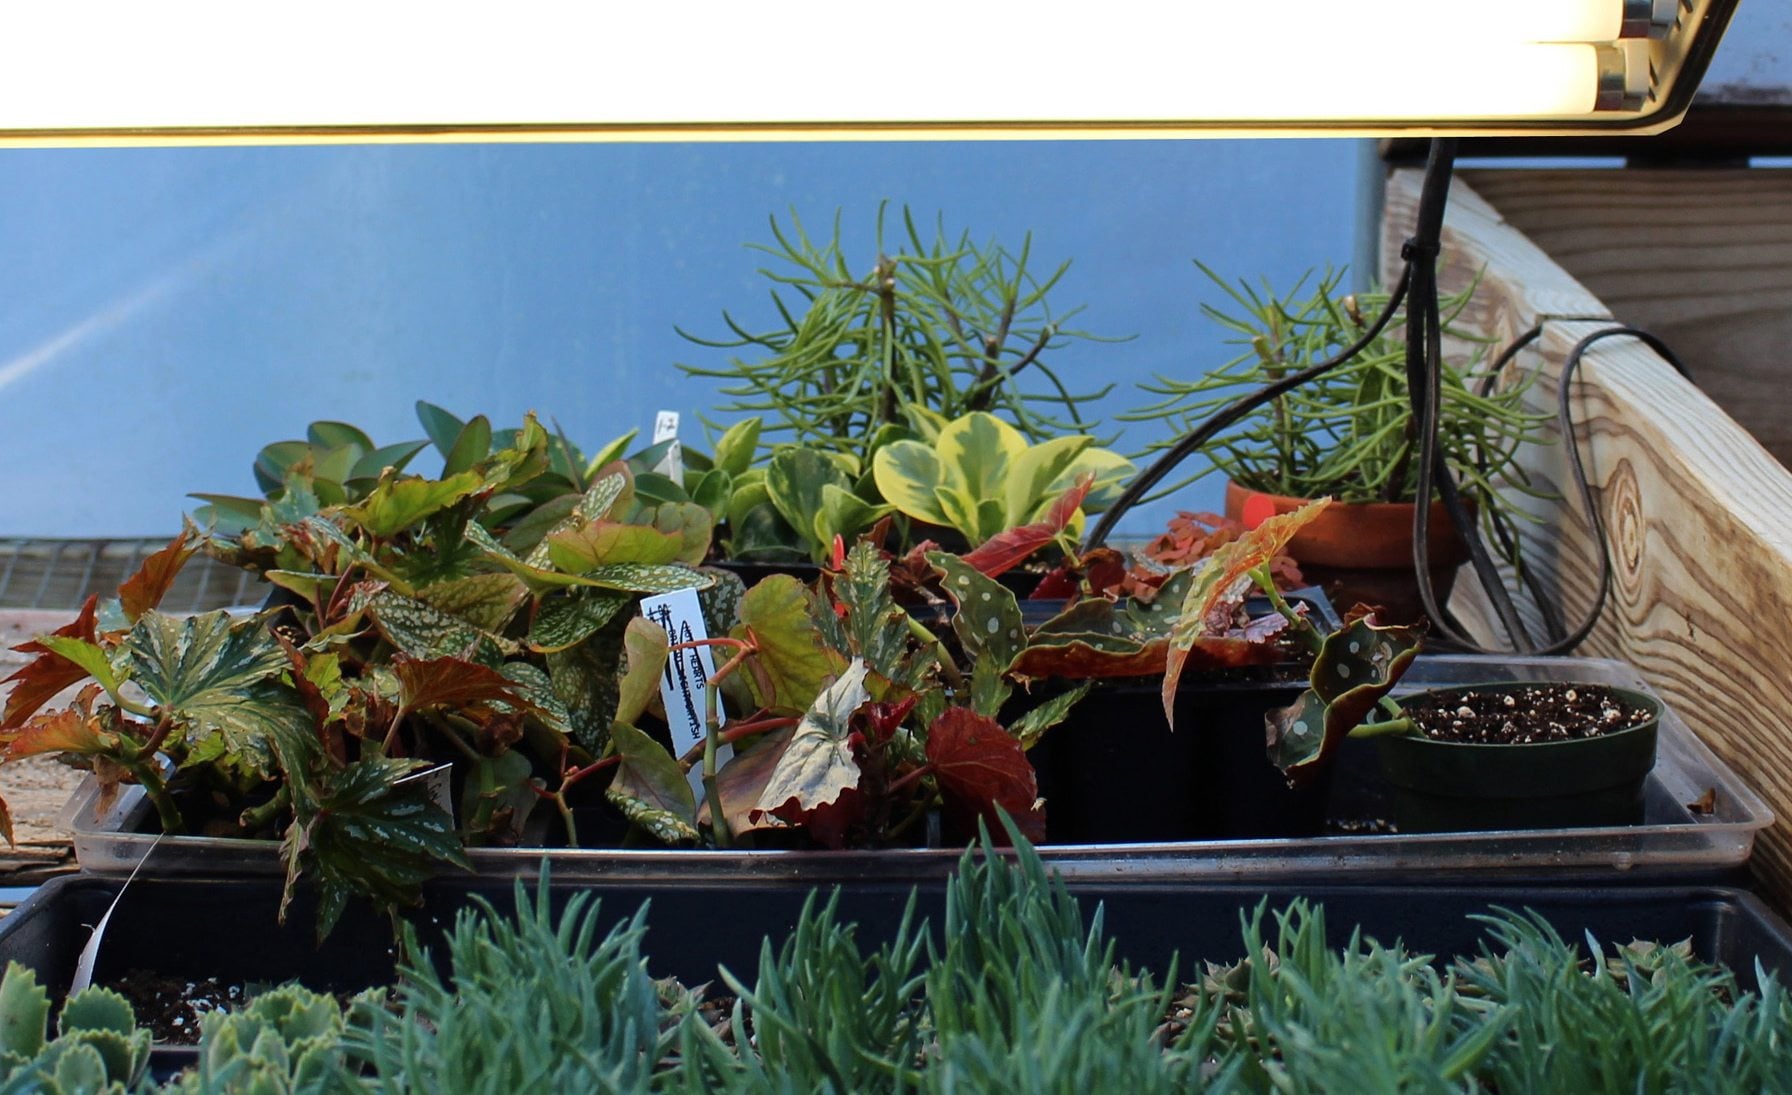 Fluorescent bulbs provide all the artificial light needed to root cuttings during winter.